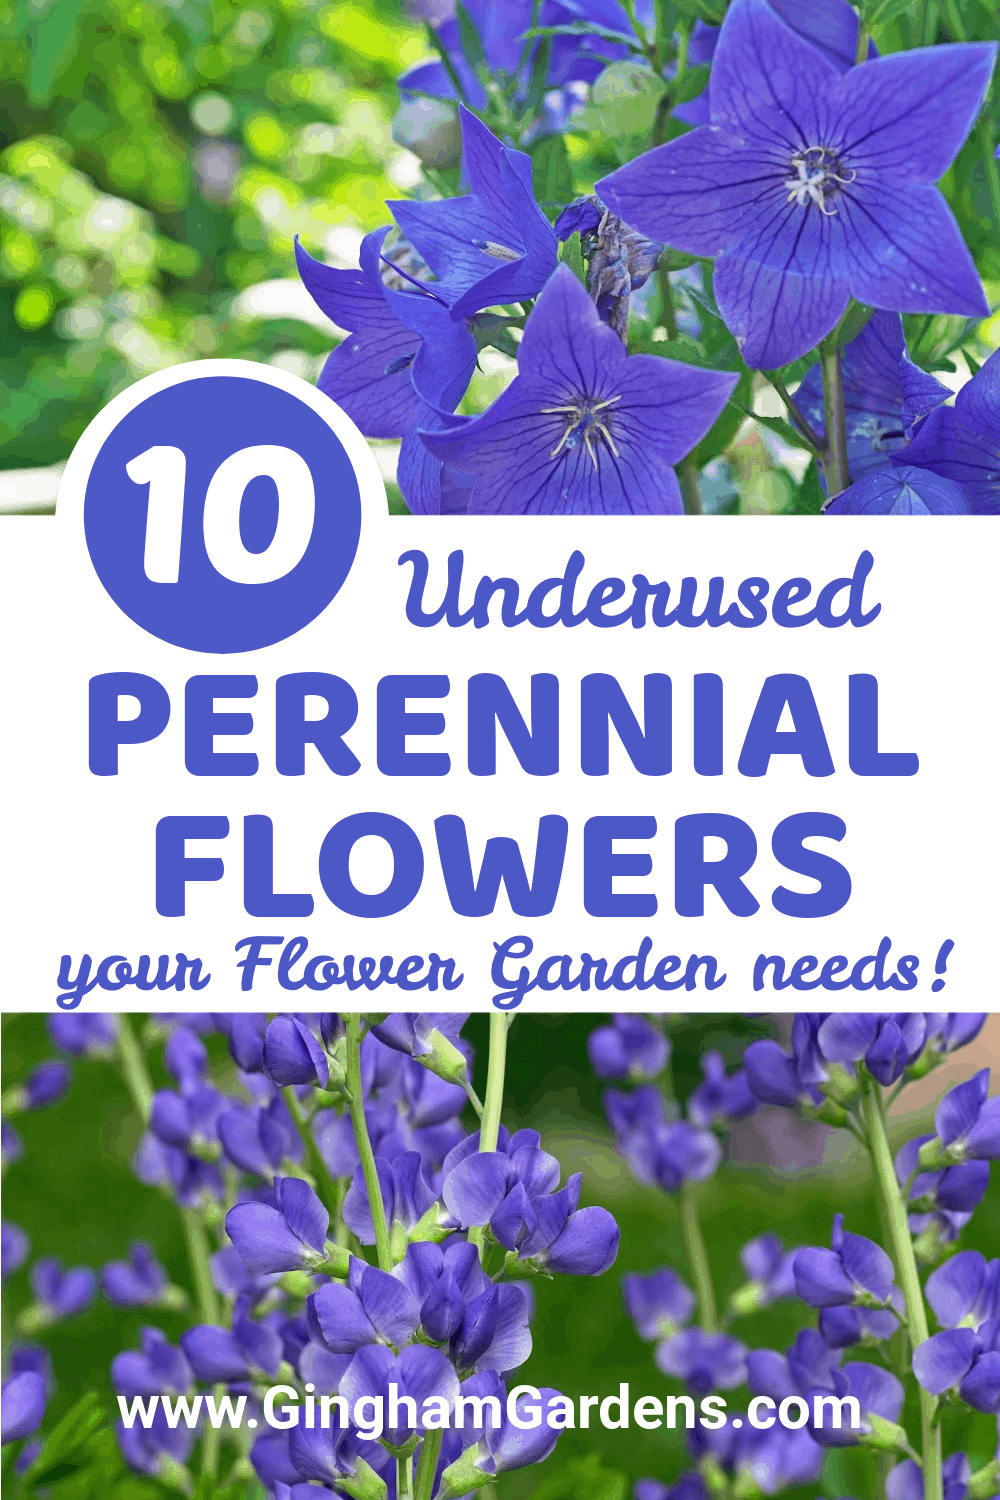 Images of flowers with text overlay - 10 Underused Perennial Flowers